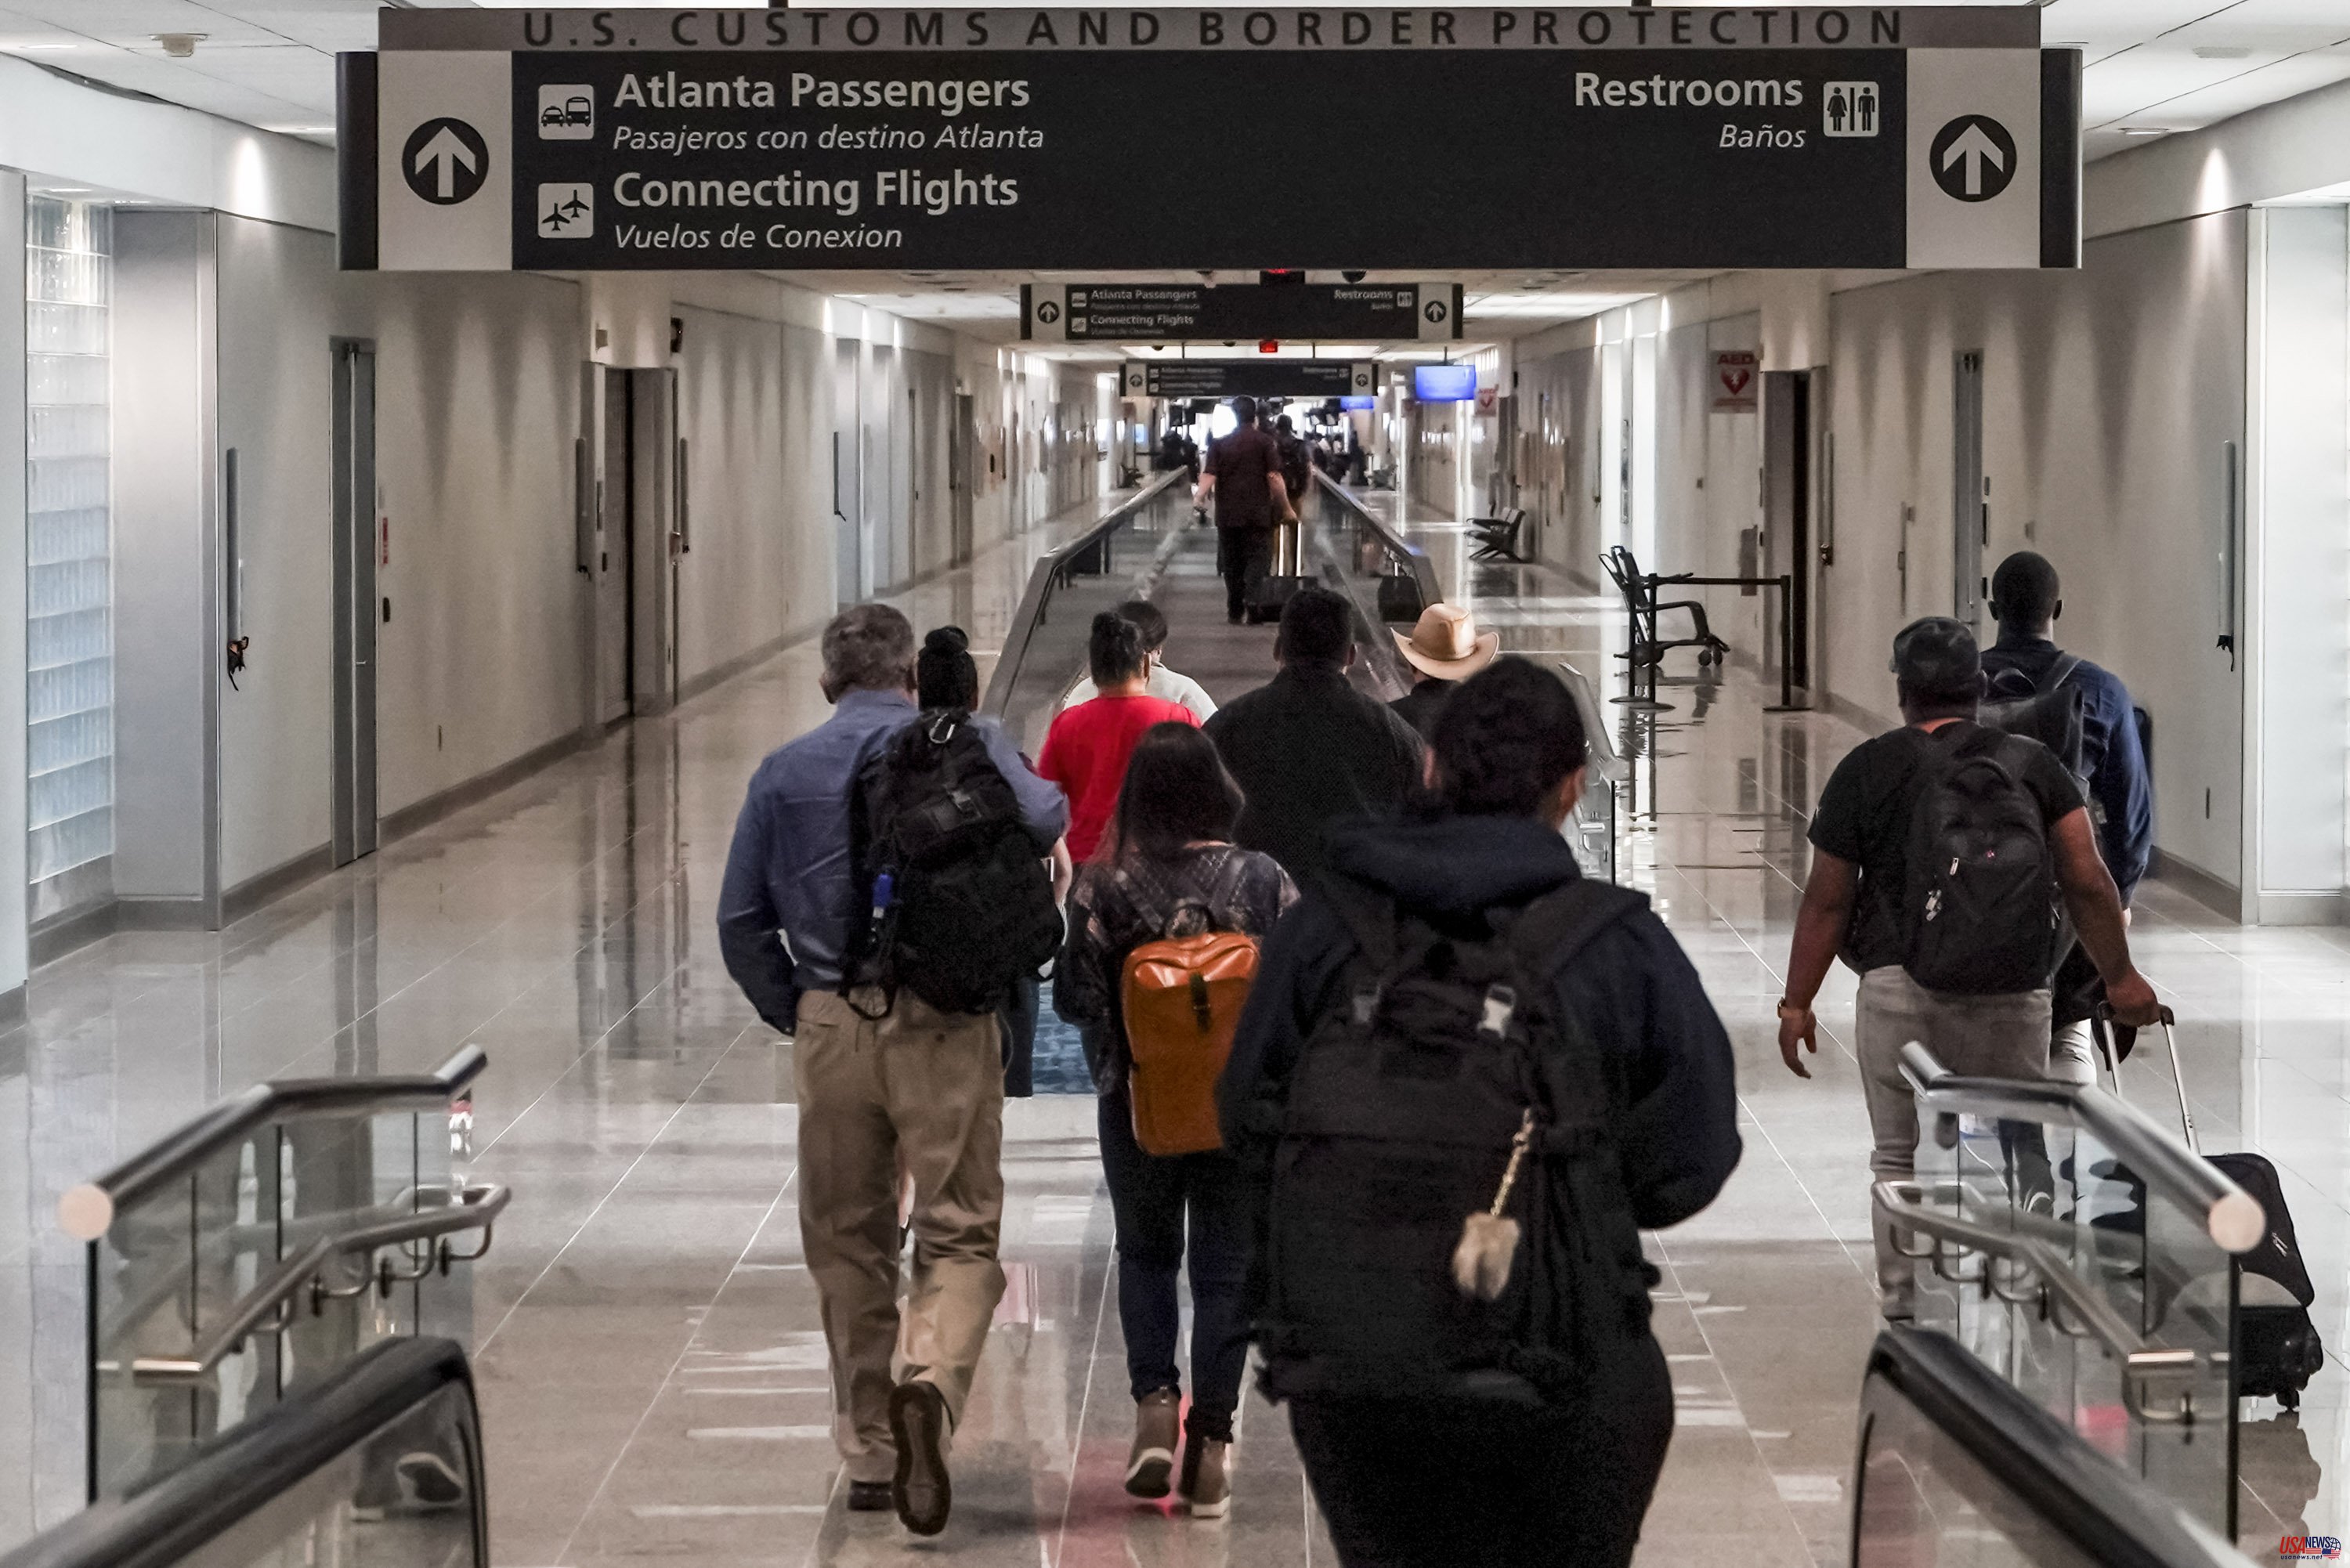 Official says Atlanta passenger cleared security with bag that could have contained a gun.